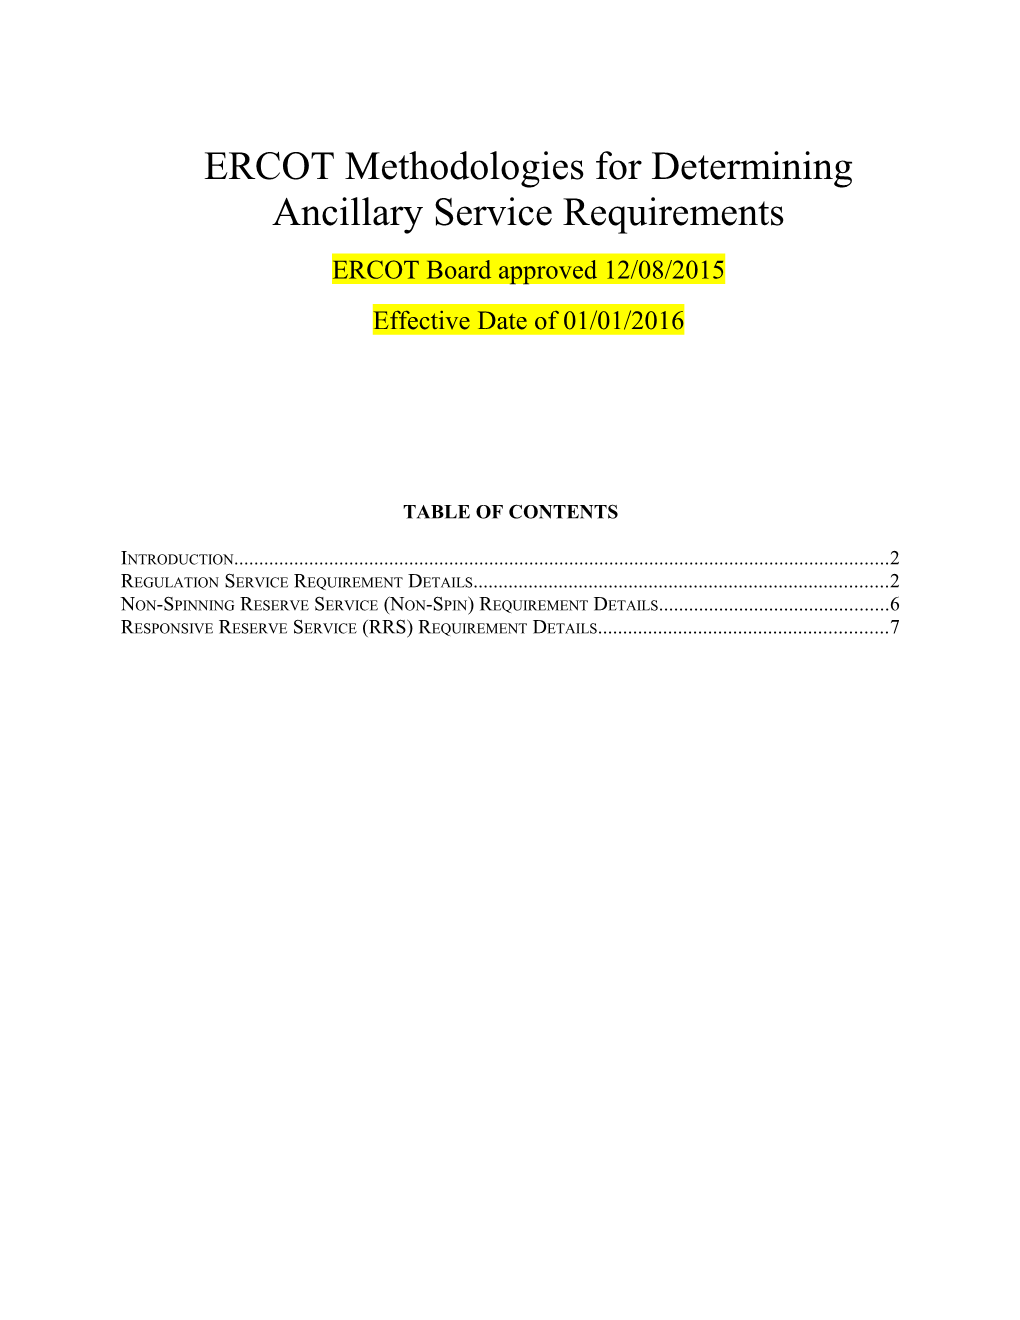 ERCOT Methodologies for Determining Ancillary Service Requirements